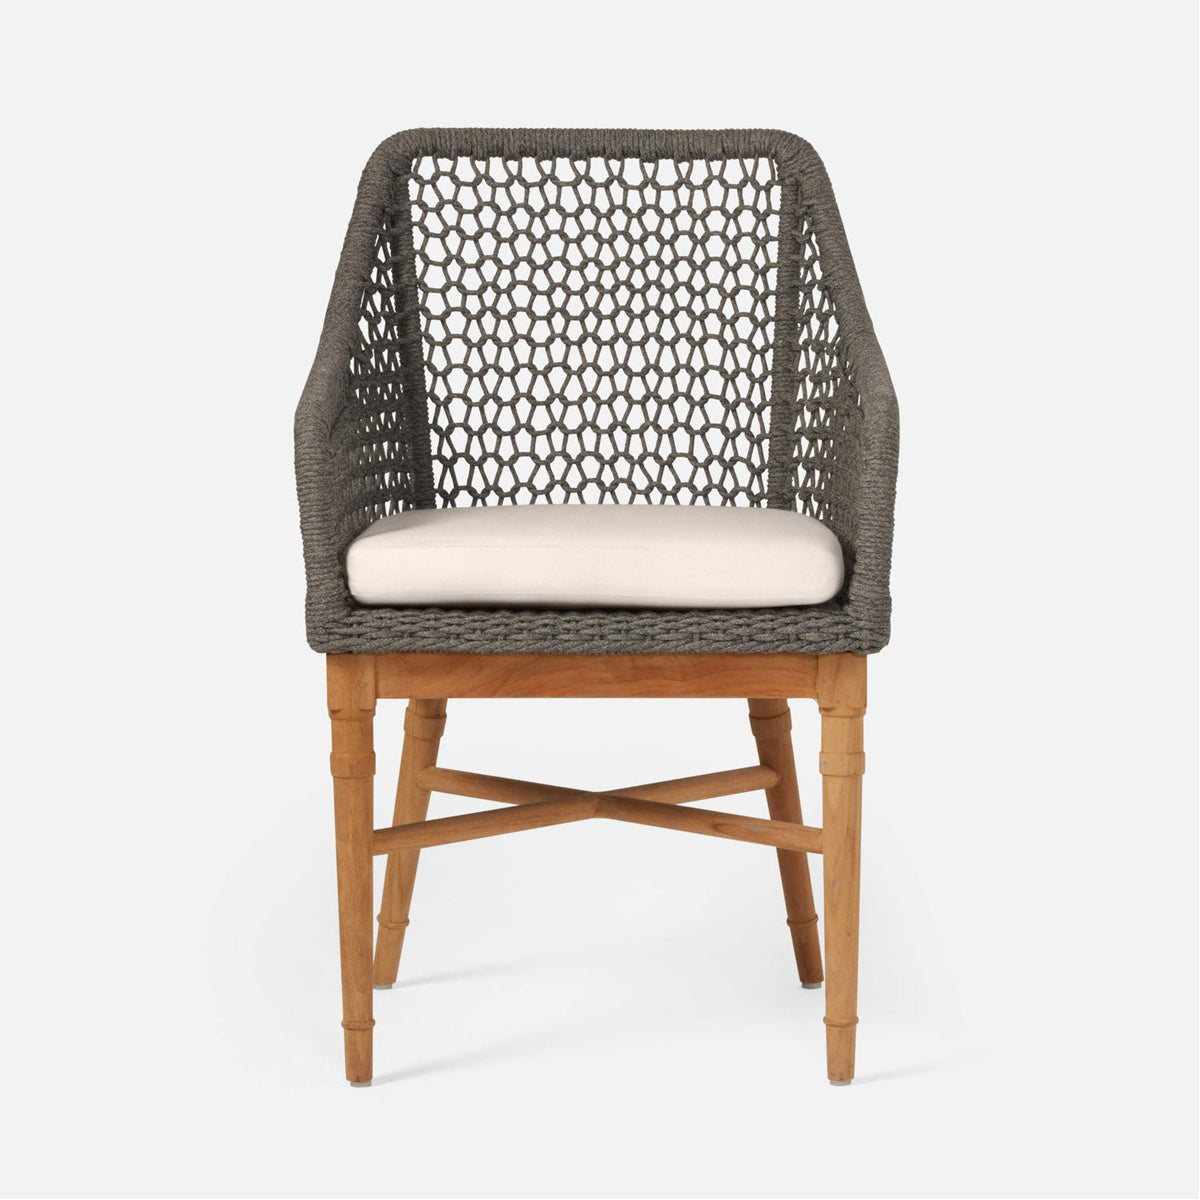 Made Goods Chadwick Outdoor Arm Chair in Lambro Boucle